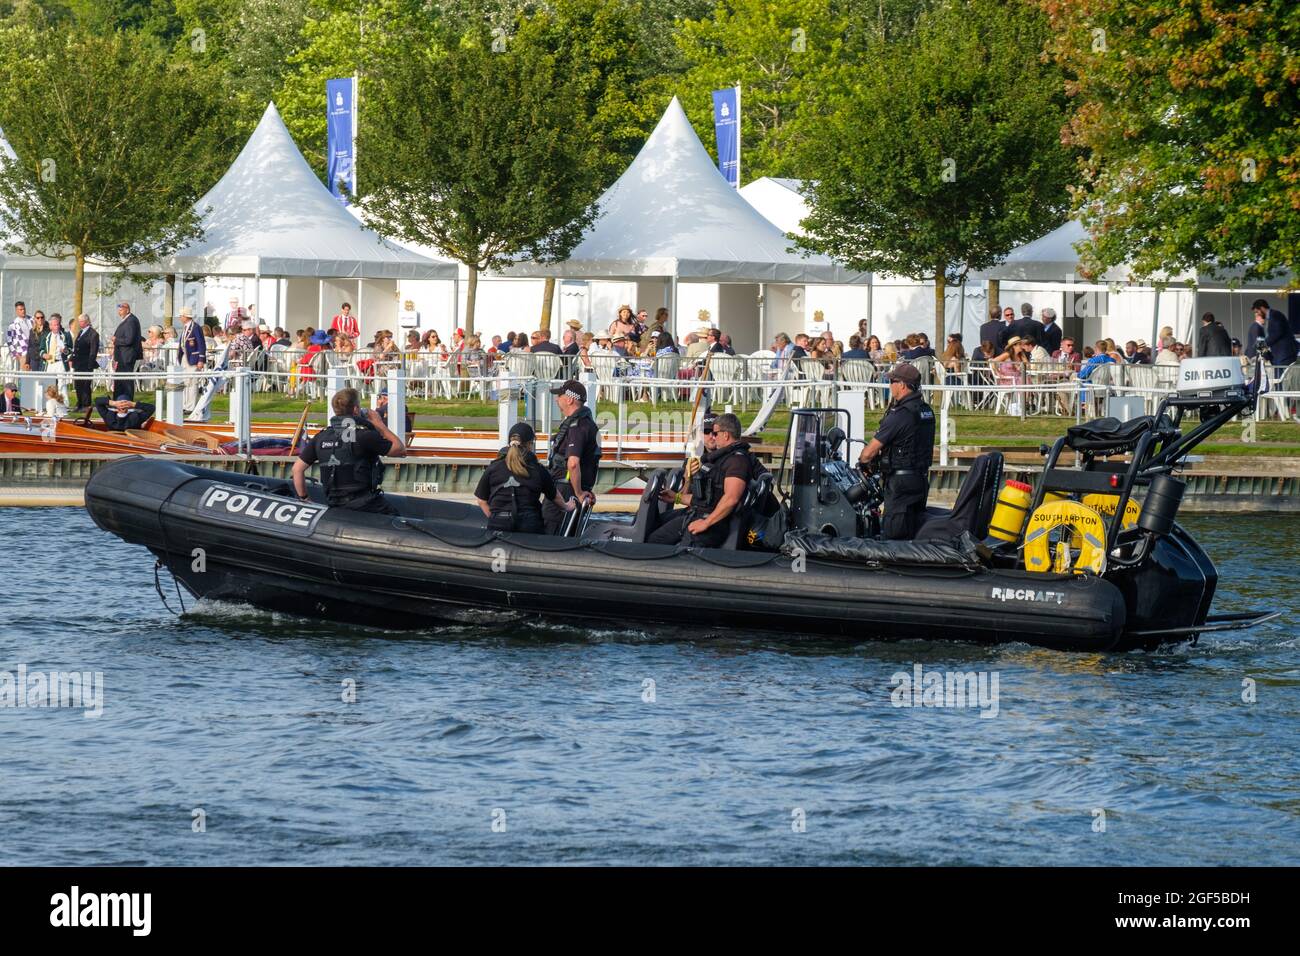 Hampshire Police Marine Support Unit on patrol in a powerful Ribcraft RIB at Henley Royal Regatta 2021 on the River Thames Stock Photo